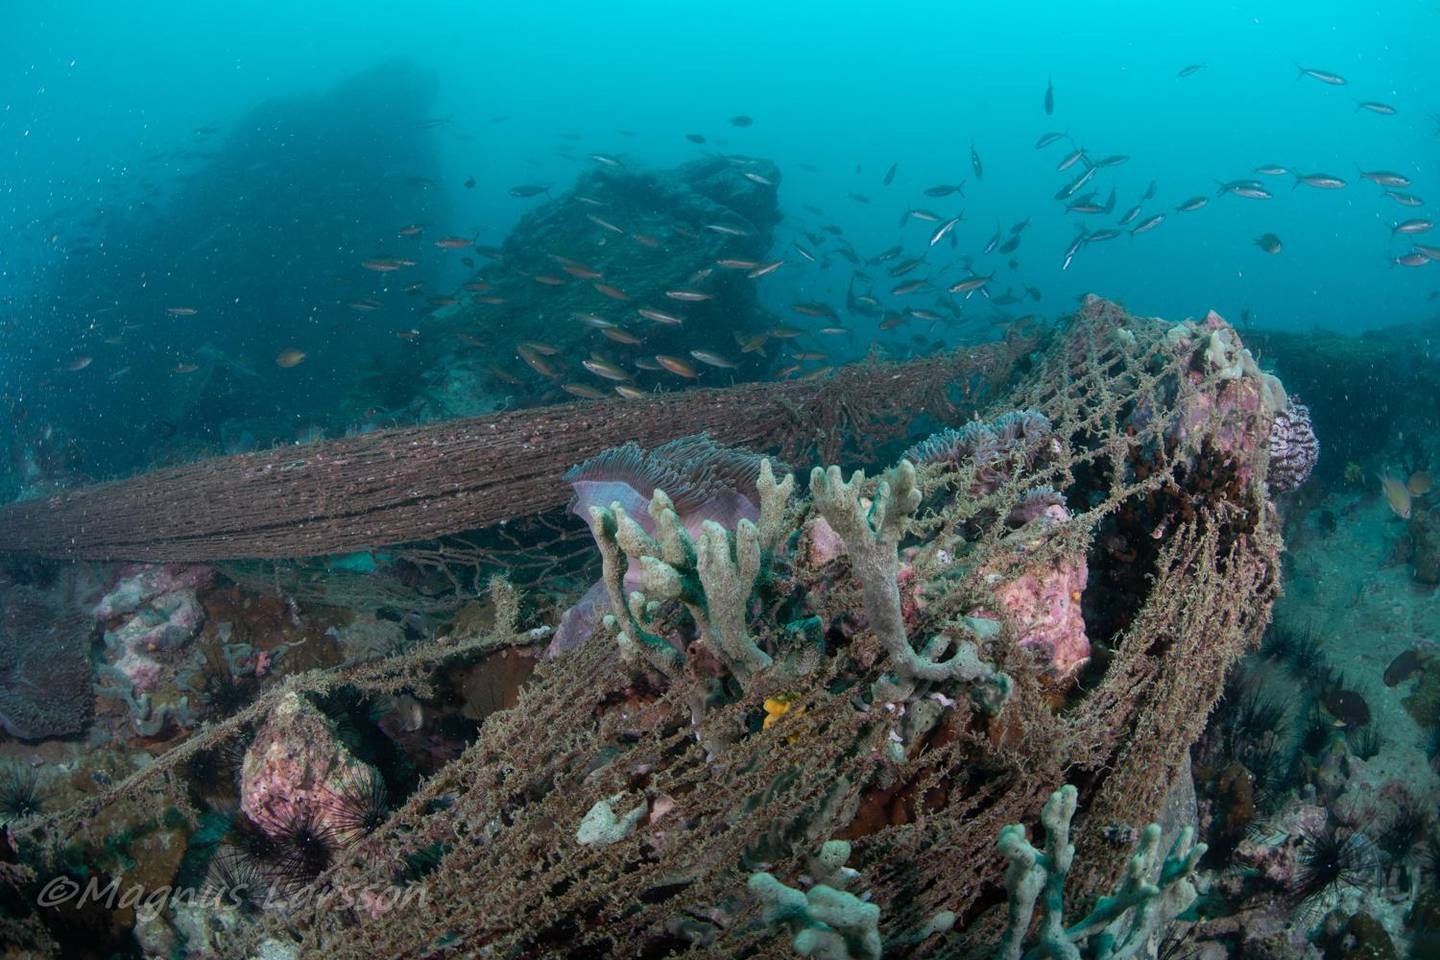 Abandoned fishing gear, known as ghost nets, damage coral reefs and marine life. Courtesy Magnus Larrson